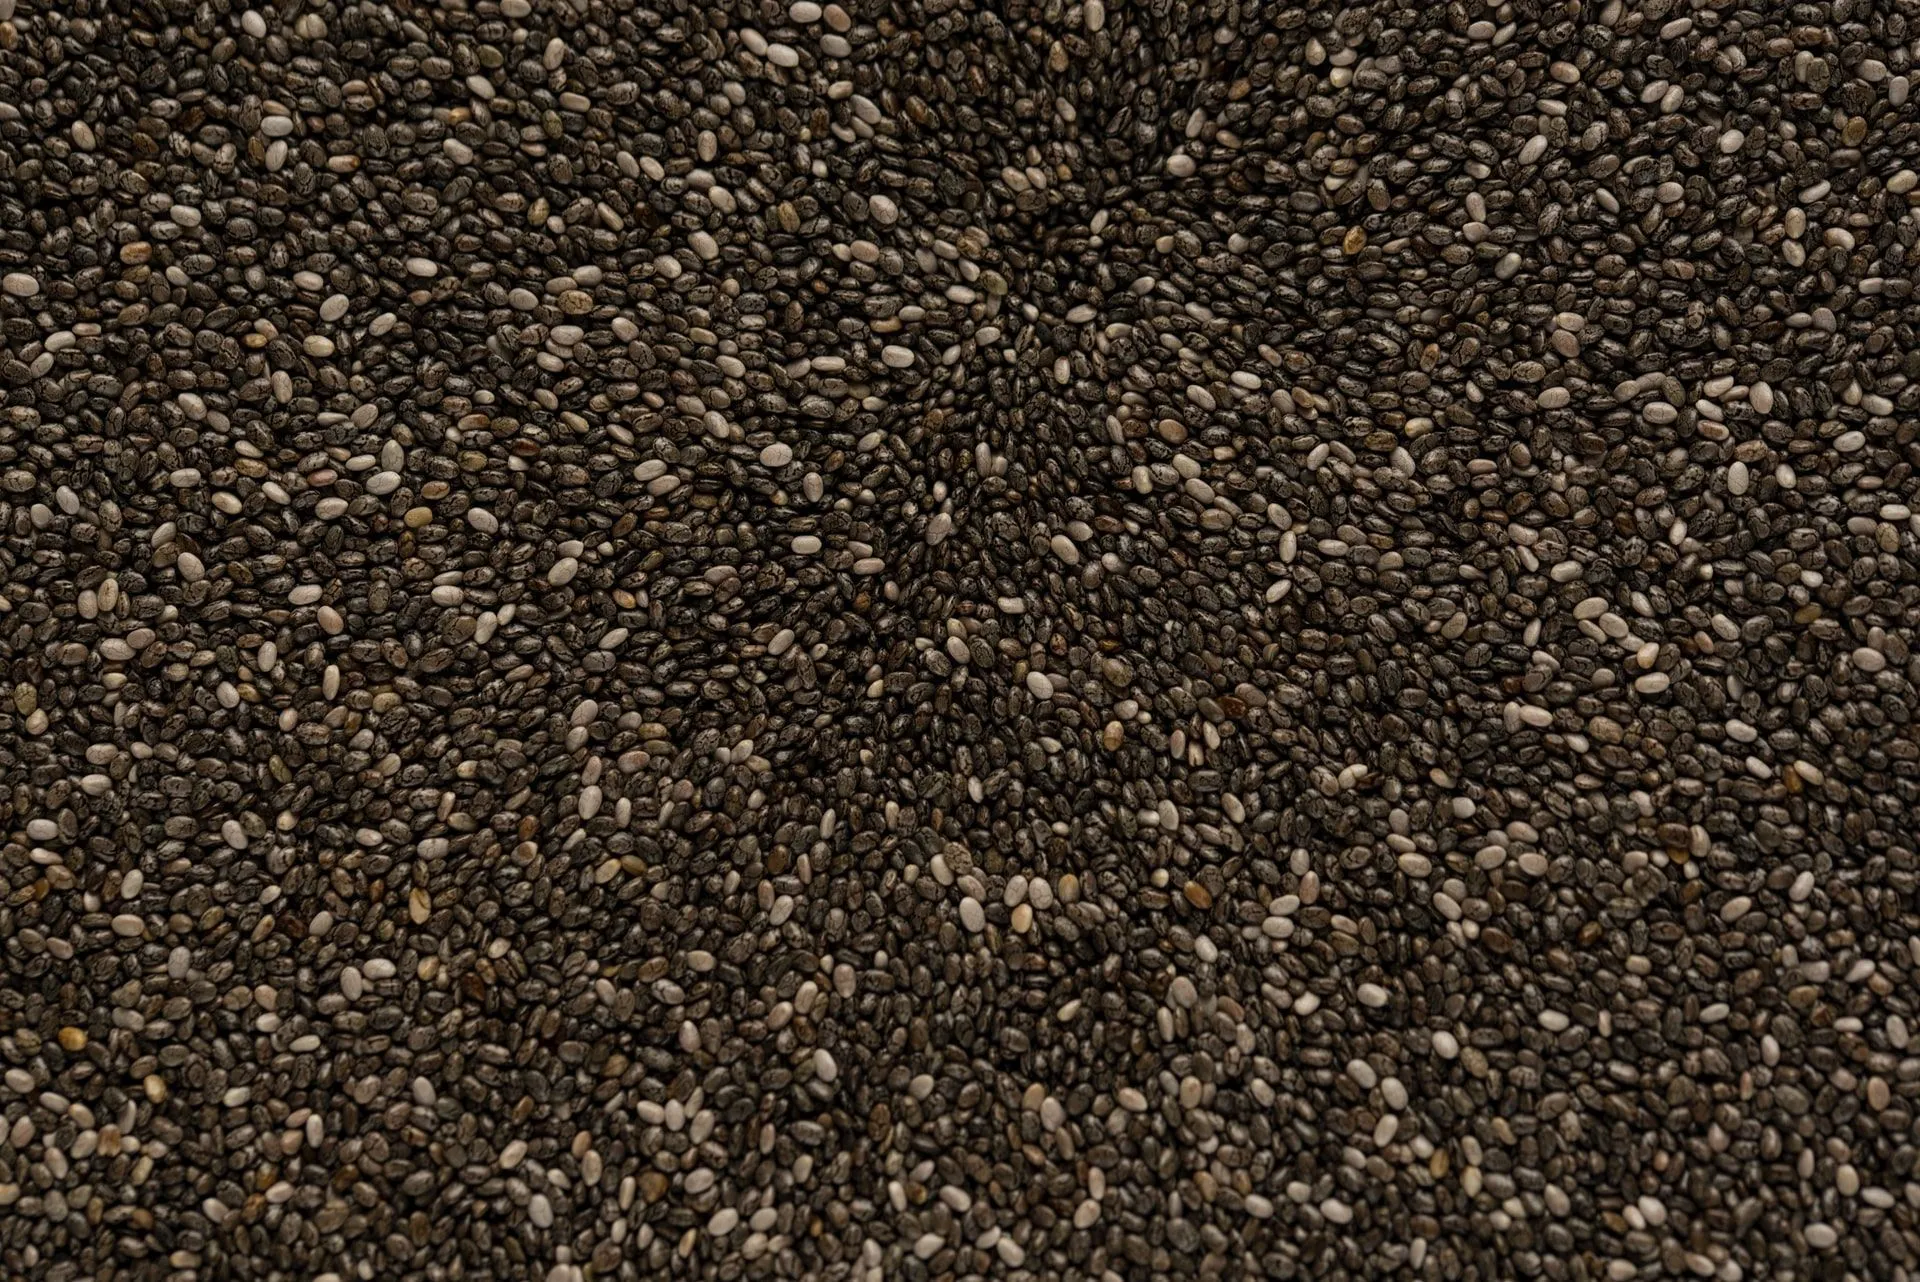 The Aztech civilization believed chia seeds contained several healing properties.